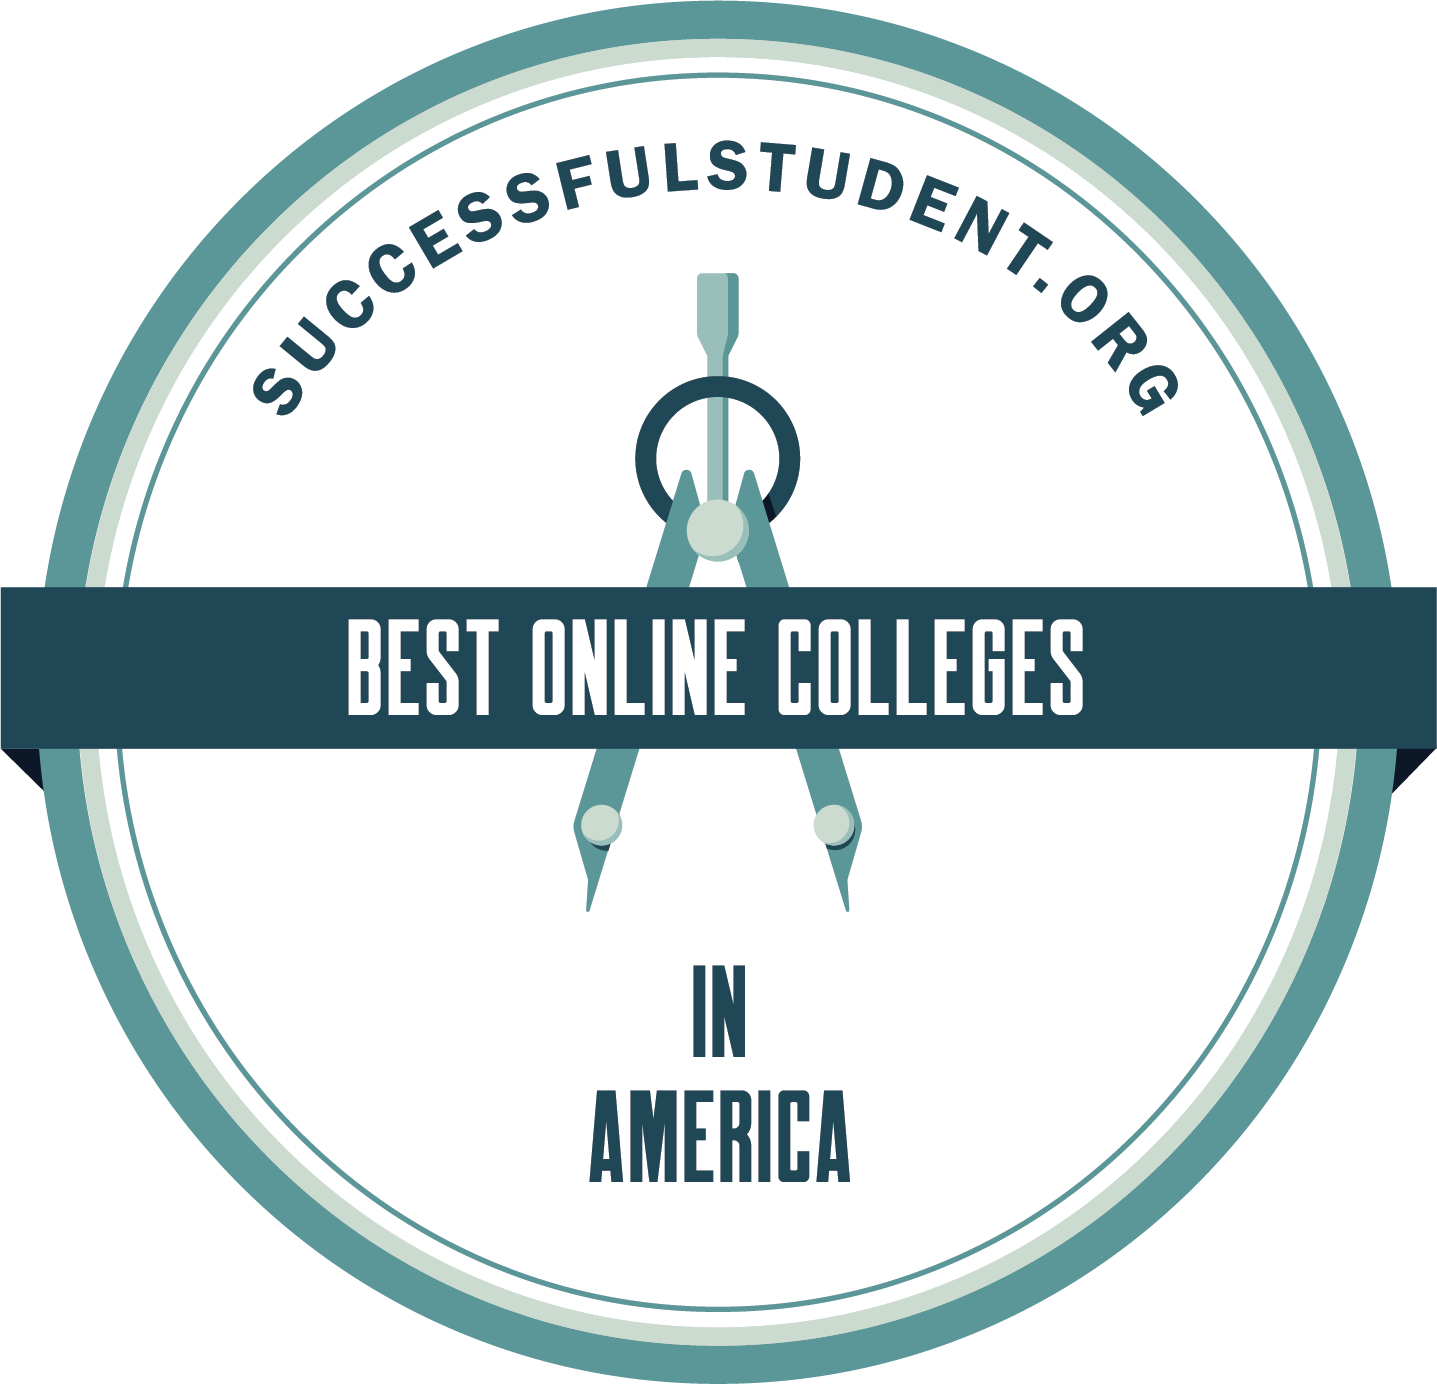 The Best Online Colleges in America's Badge